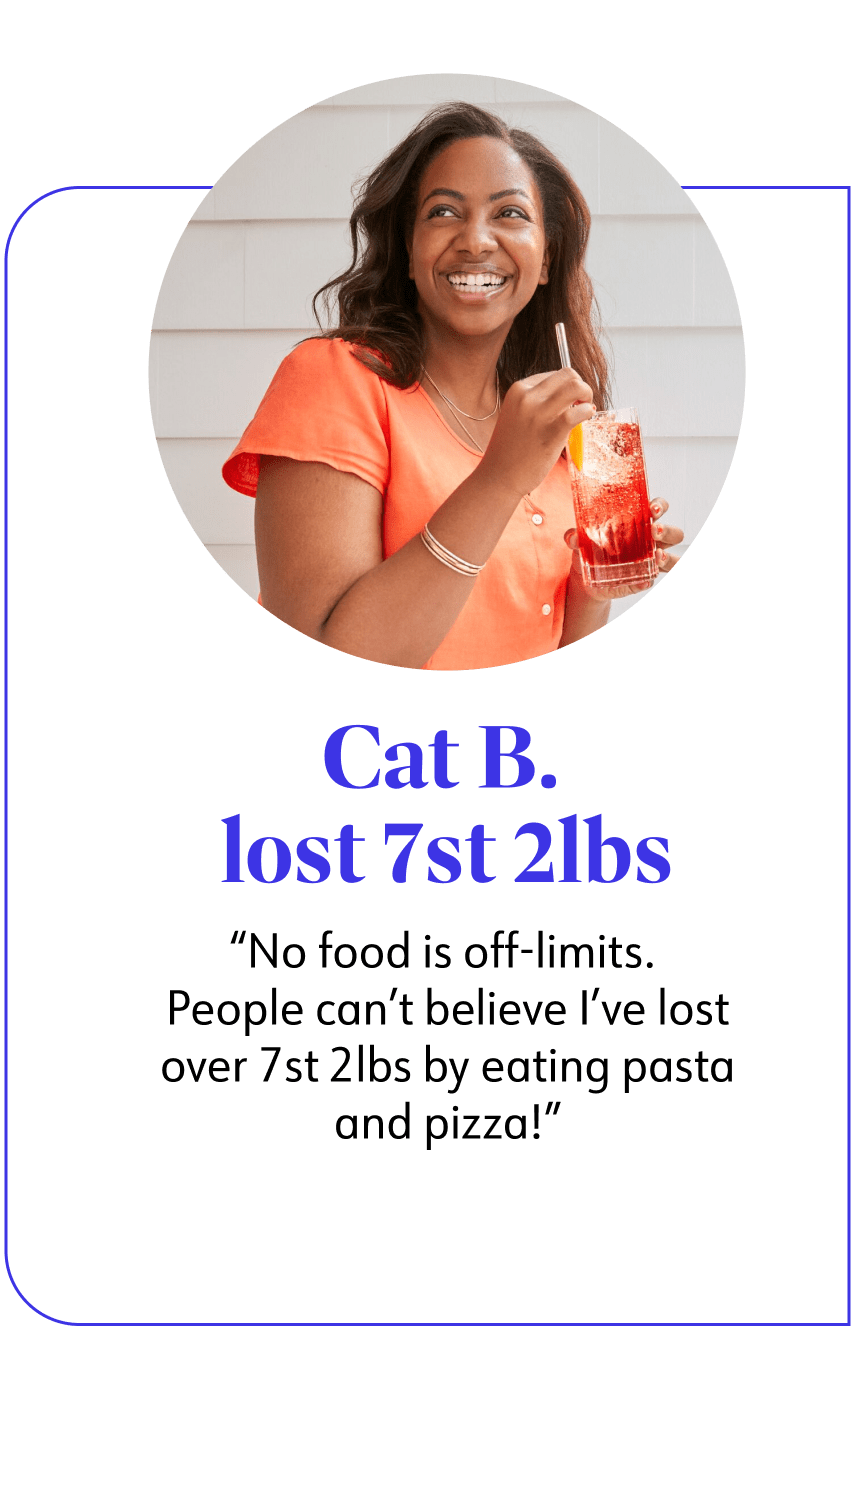 WW member Cat B lost 7st 2lbs^ no food is off-limits people can't believe i've lost over 7st 2 lbs by eating pasta and pizza!